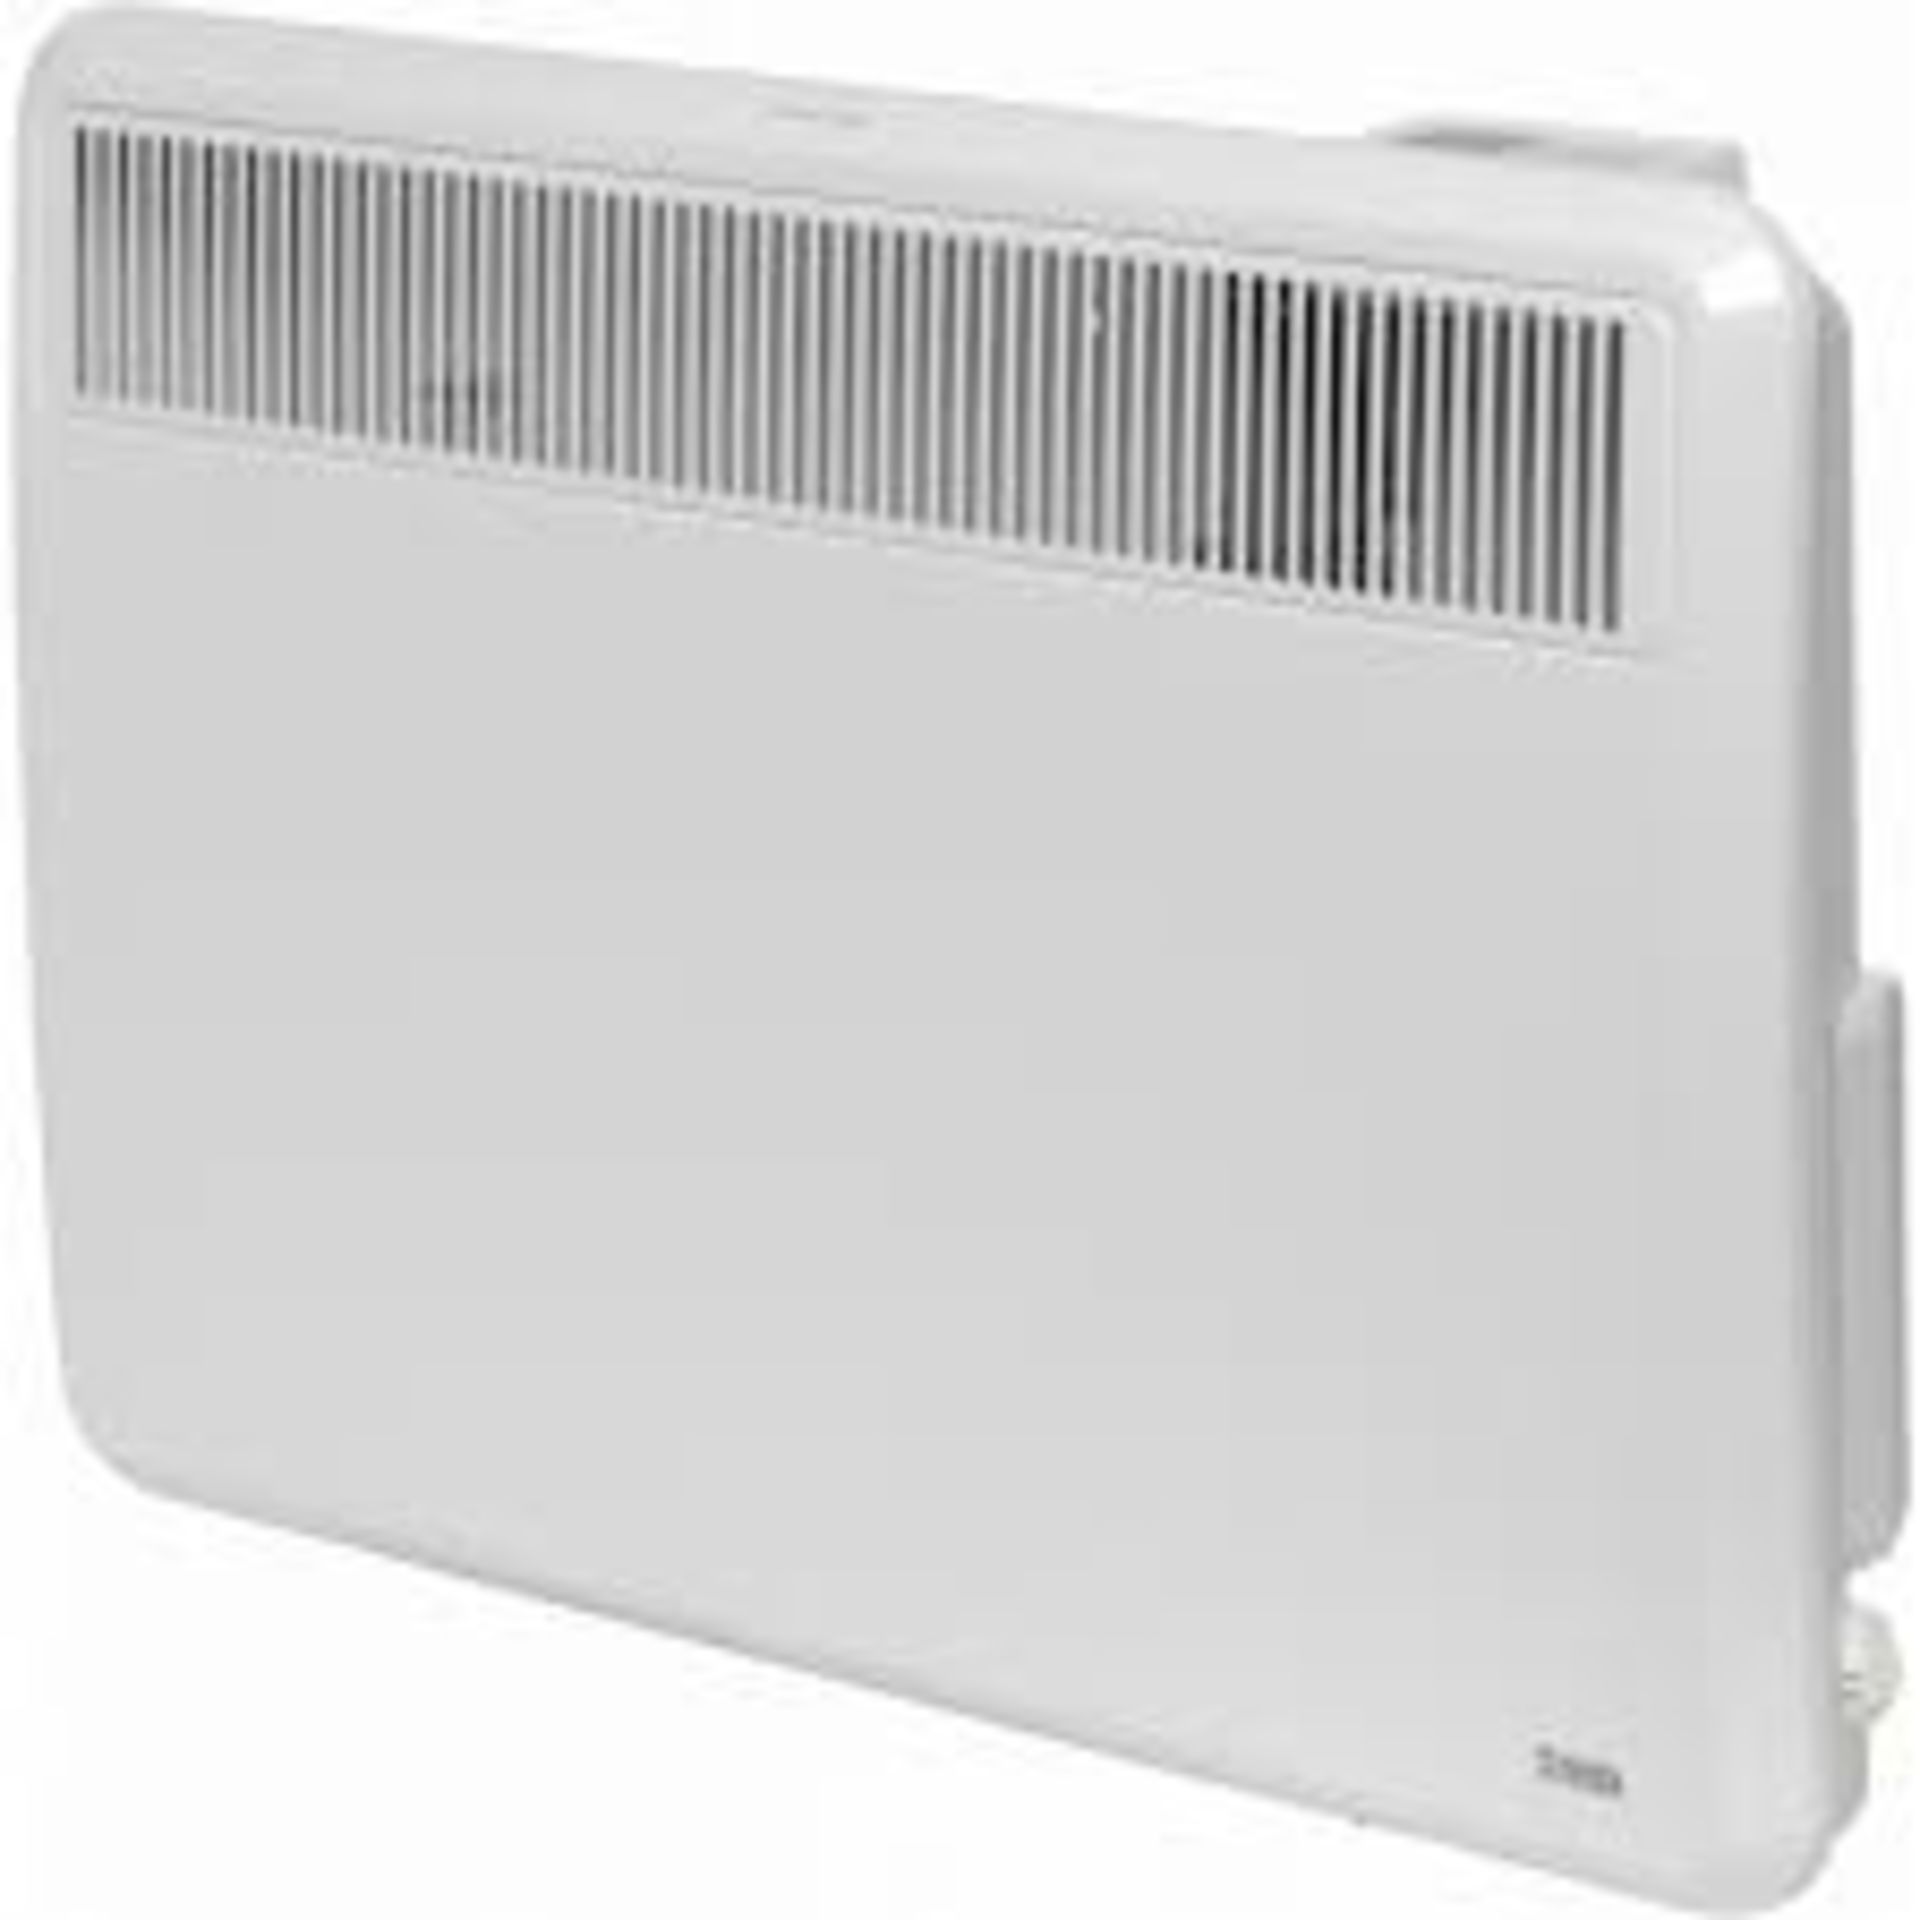 TRADE LOT 5 x NEW & BOXED CREDA HEATING TPRIII 1000NC 1000W ELECTRIC HEATER. (ROW16). RRP £195. - Image 2 of 2